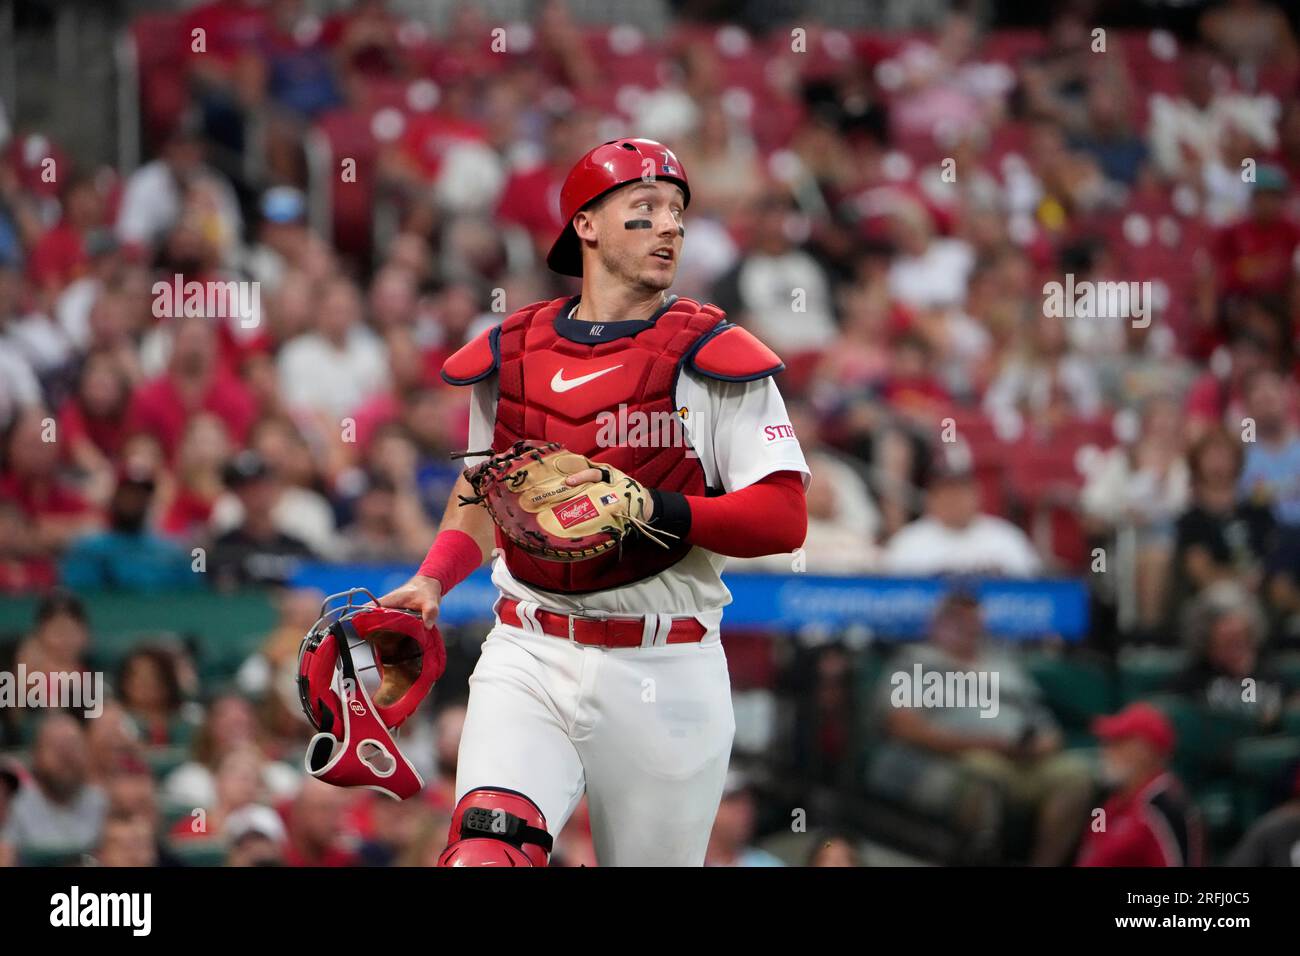 ST. LOUIS, MO - JULY 16: St. Louis Cardinals catcher Andrew Knizner (7)  during a game between the Cincinnati Reds and the St. Louis Cardinals on  July 16, 2022, at Busch Stadium